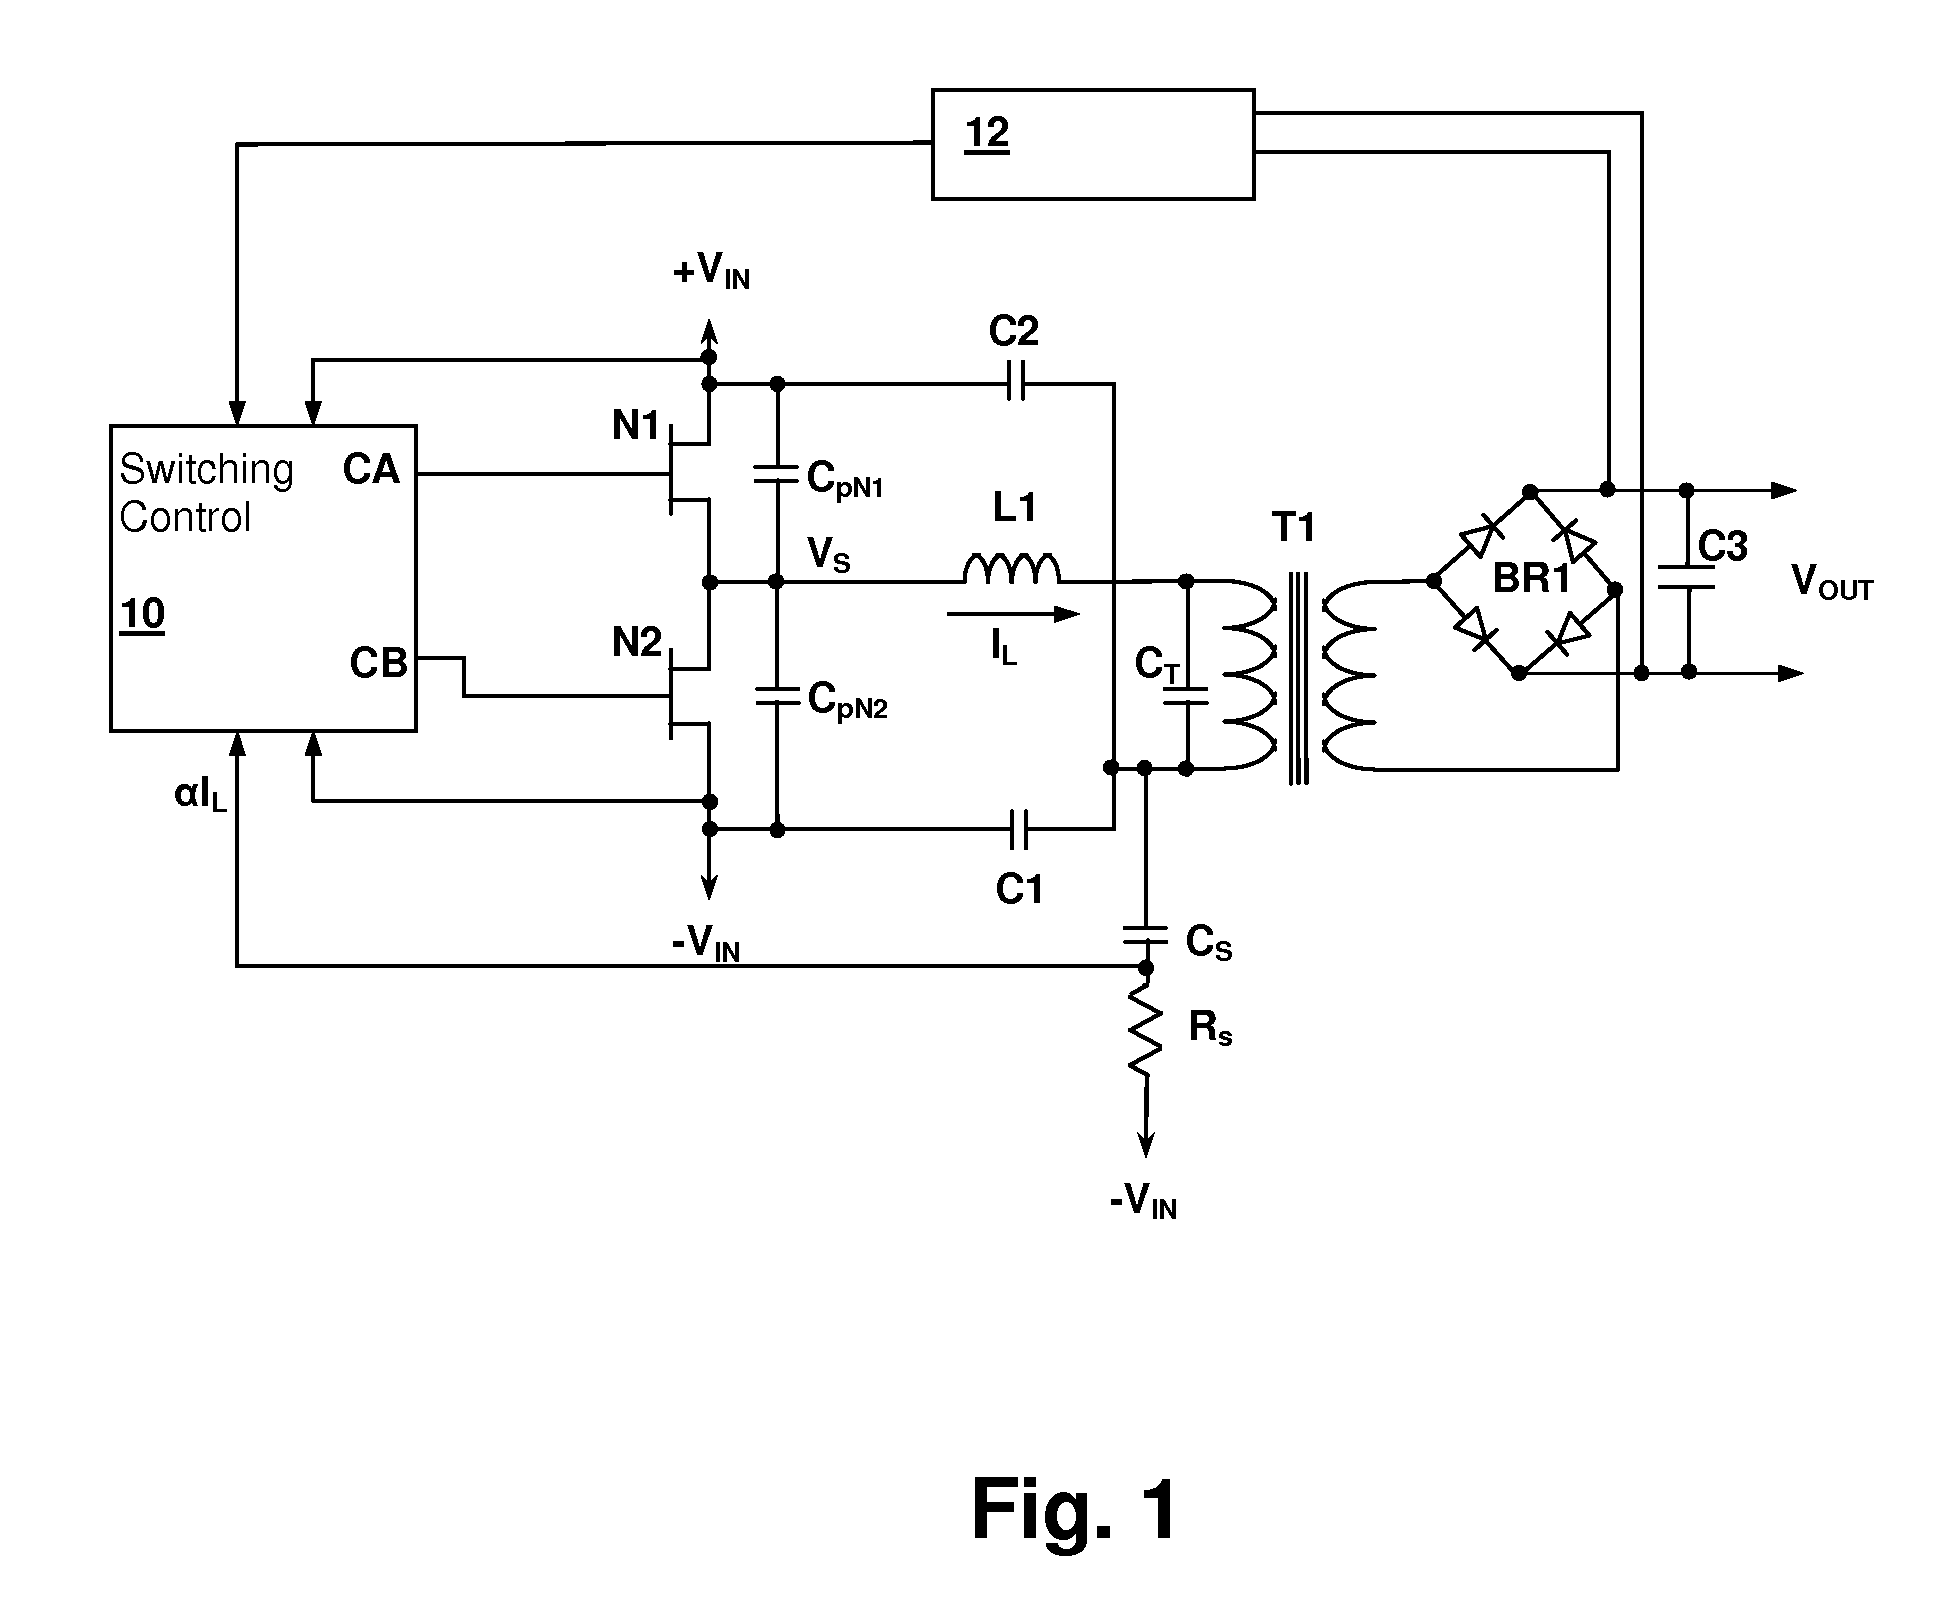 Resonant switching power converter with adaptive dead time control